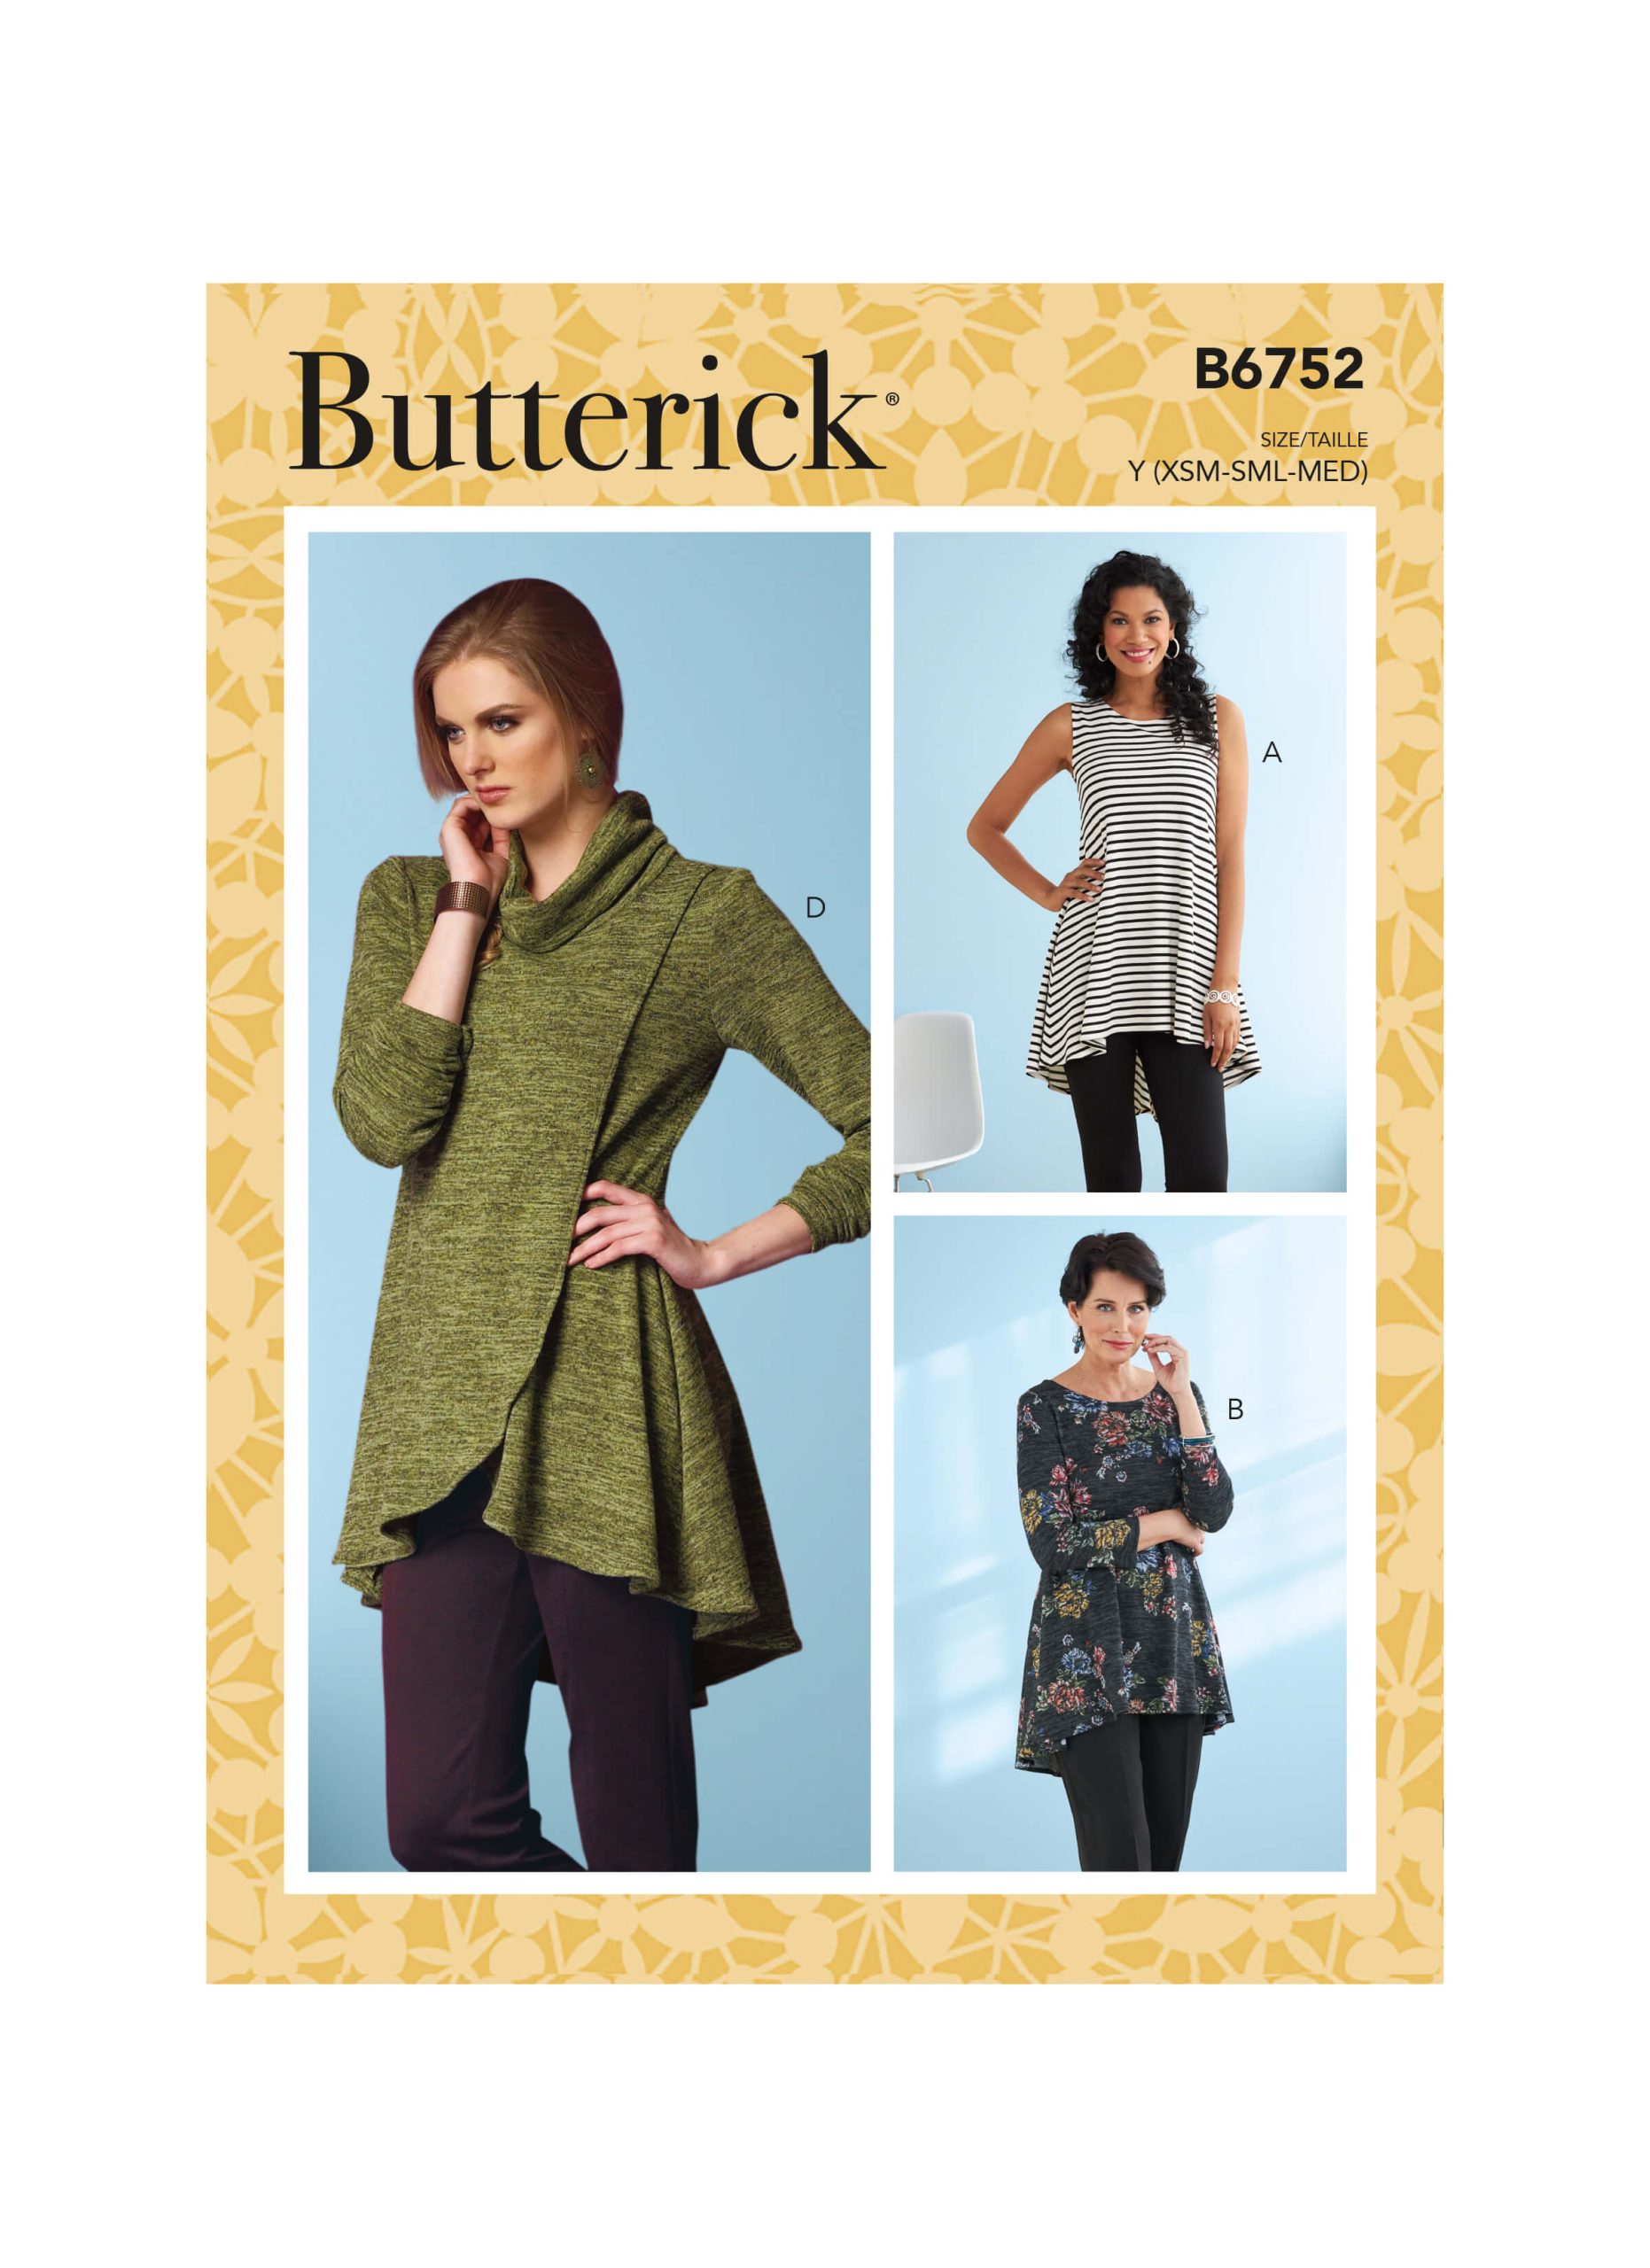 Butterick Sewing Pattern B6752 Misses' Fit and Flare Knit Tunics